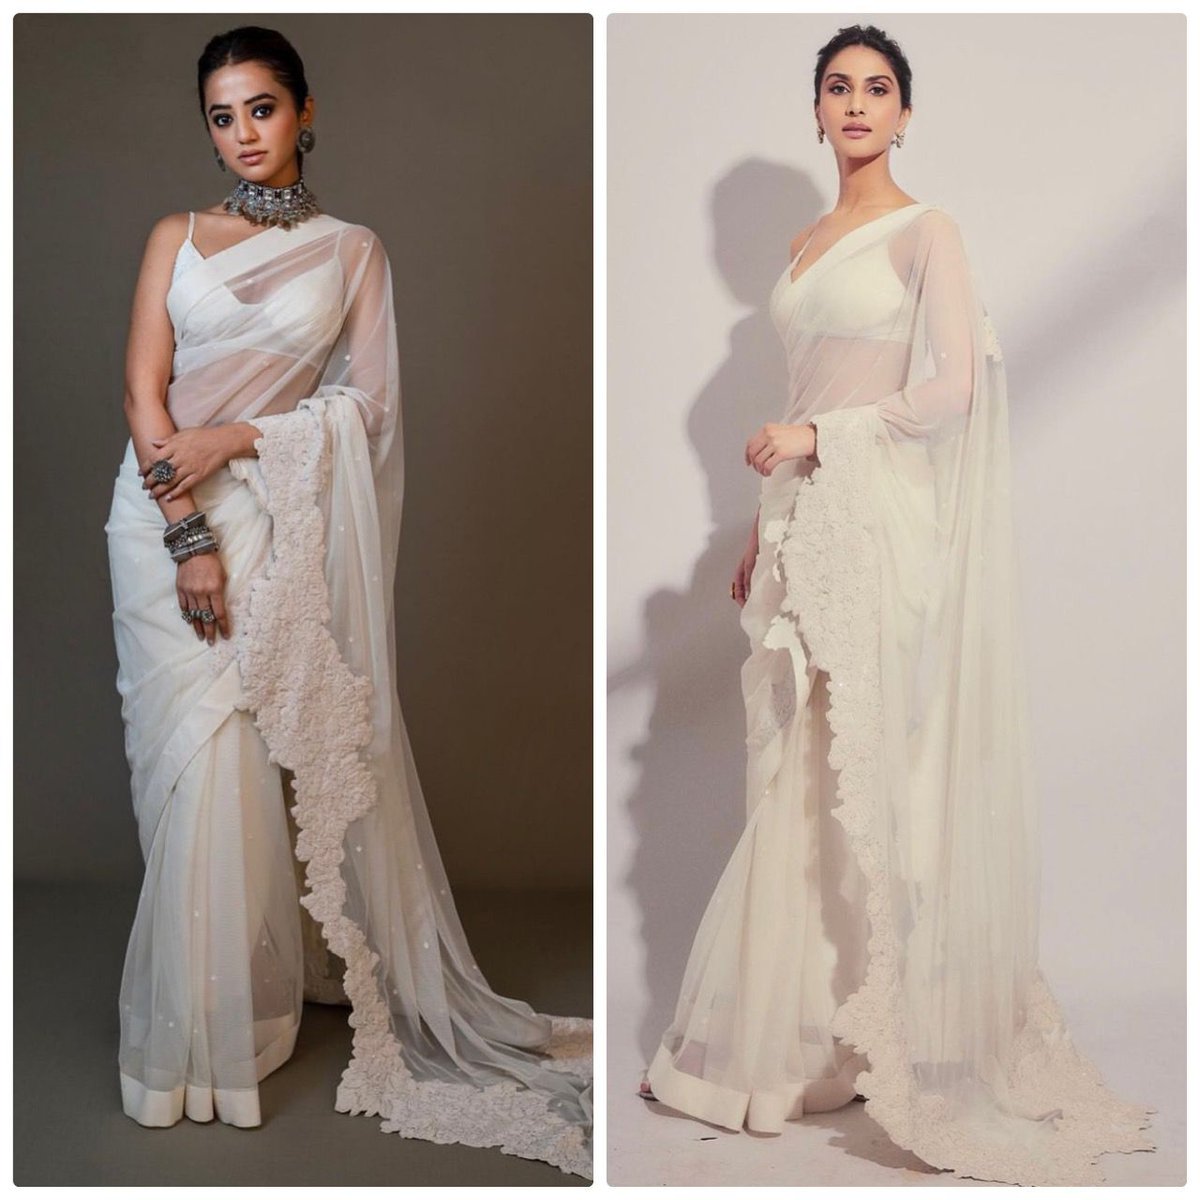 Fashion face off ! 
Who wore the Rohit bal's saree better according to you ? 🤩😍

#hellyshah #vanikapoor #fashionfaceoff #rohitbal